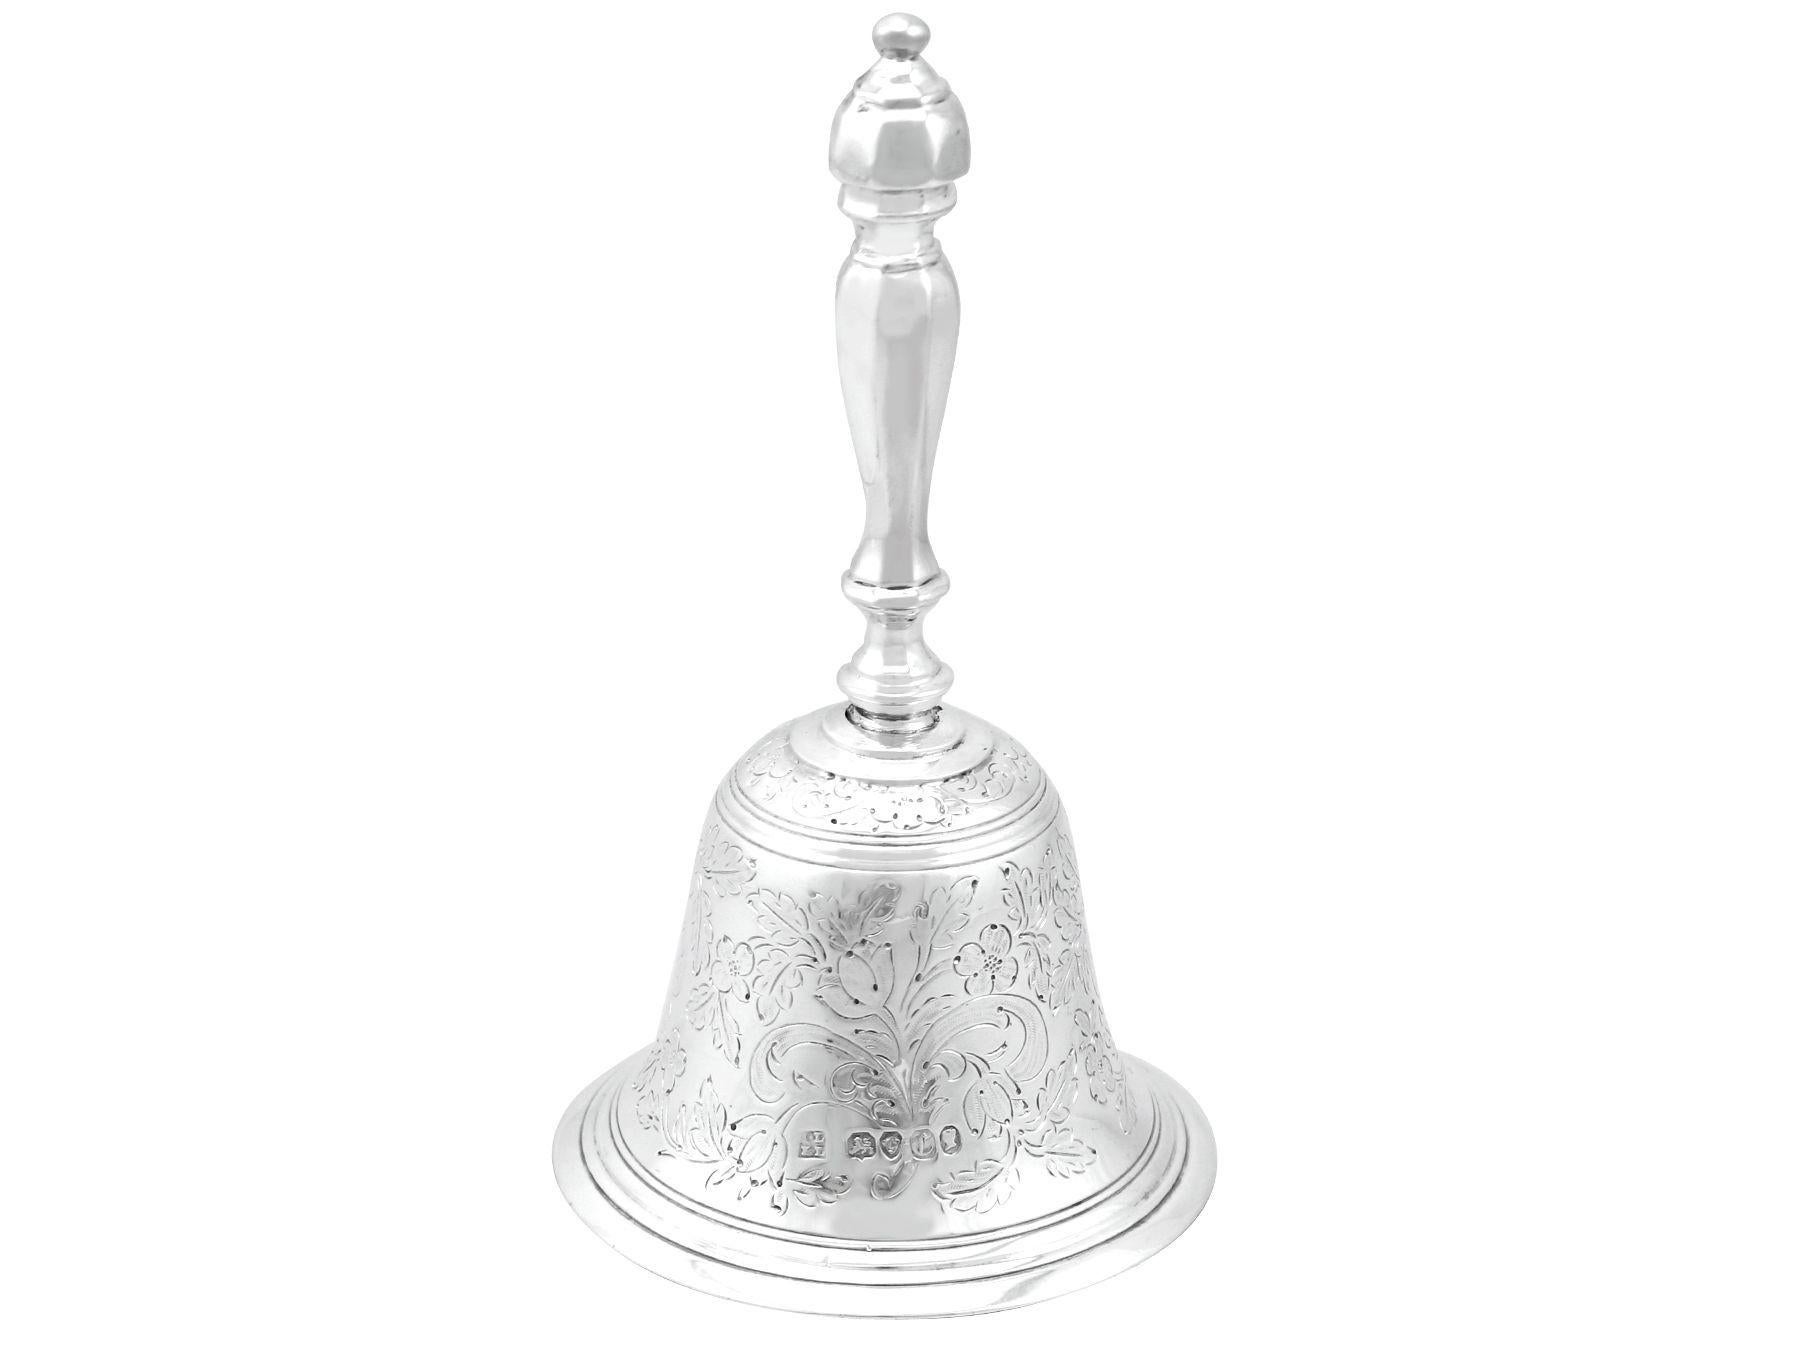 An exceptional, fine and impressive antique Victorian English sterling silver table bell; an addition to our range of ornamental silverware. 

This exceptional antique Victorian sterling silver hand bell has a plain bell-shaped form.

The